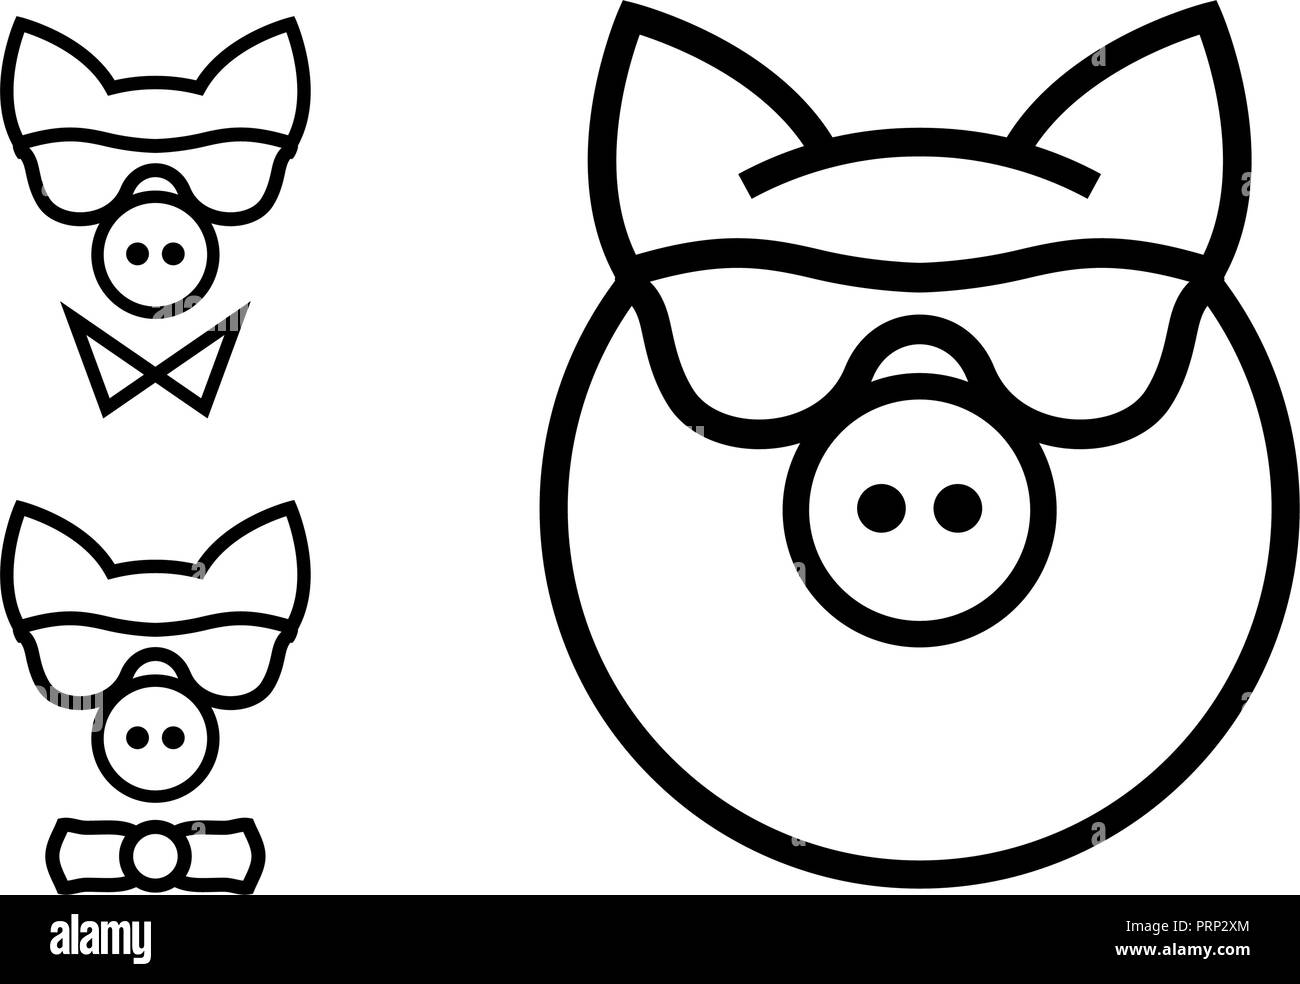 Fashionable Pig Minimalistic Vector Icon. Year of the Pig - 2019. Merry Christmas and Happy New Year Design Elements. Resource for Creating Postcards, Calendars or Posters, Presentations or Banners. Stock Vector